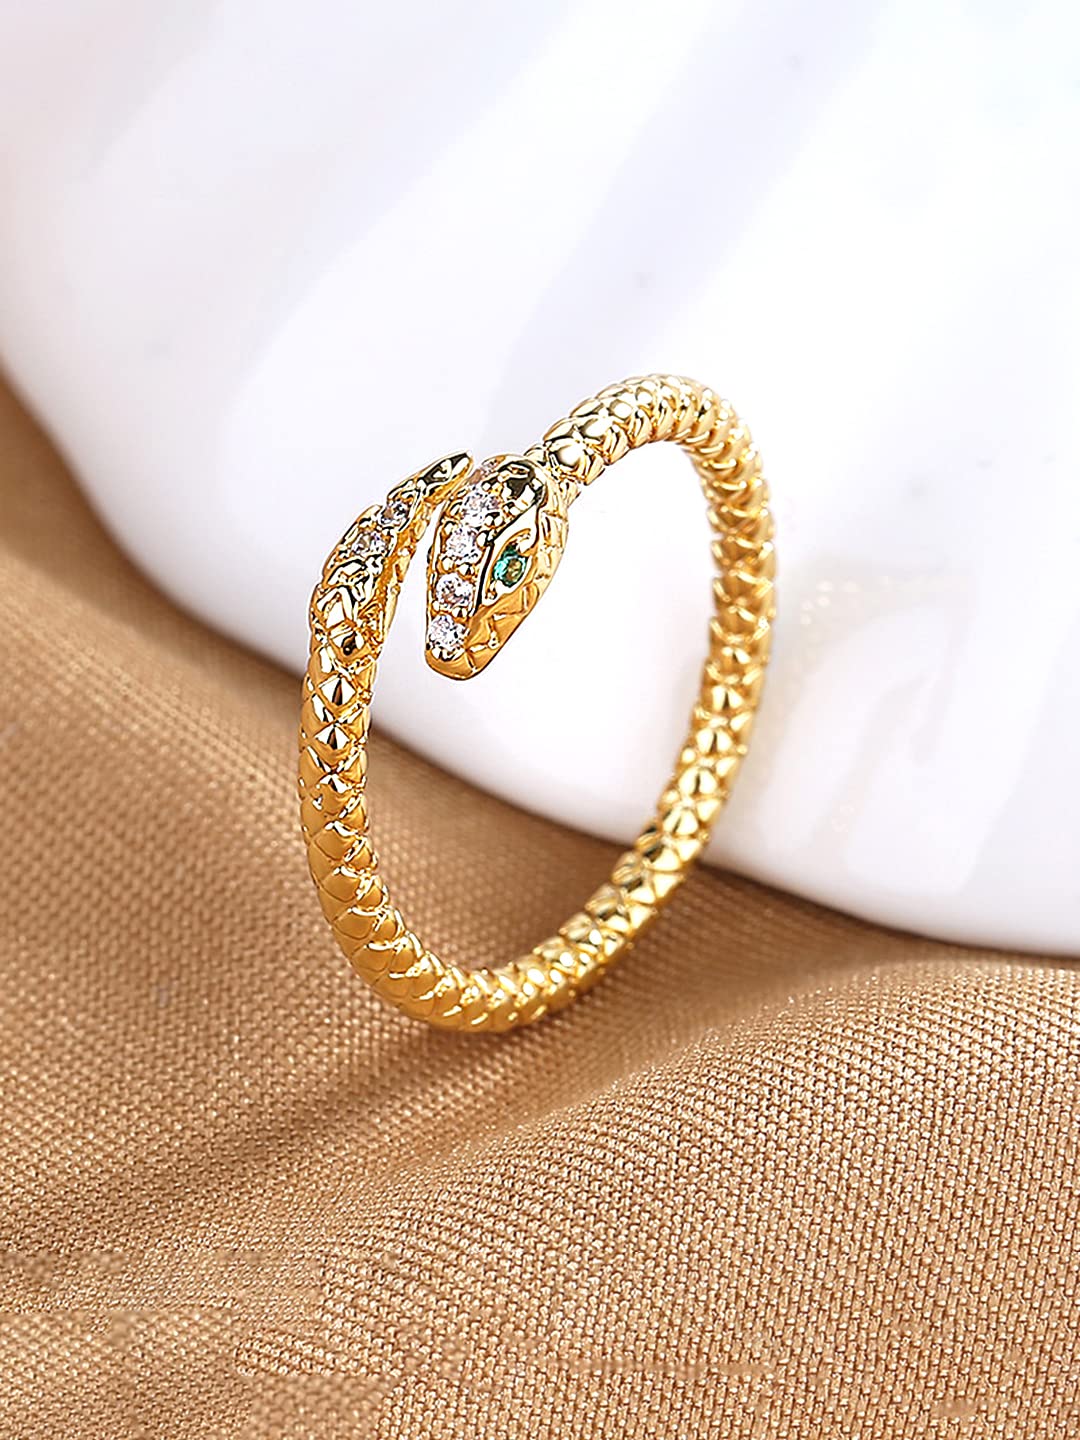 Buy Unique Snake Three-finger Ring Green or Red Crystal Snake Adjustable Ring  Serpent Ring Snake Ring Snake Jewelry Cool Party Ring Online in India - Etsy